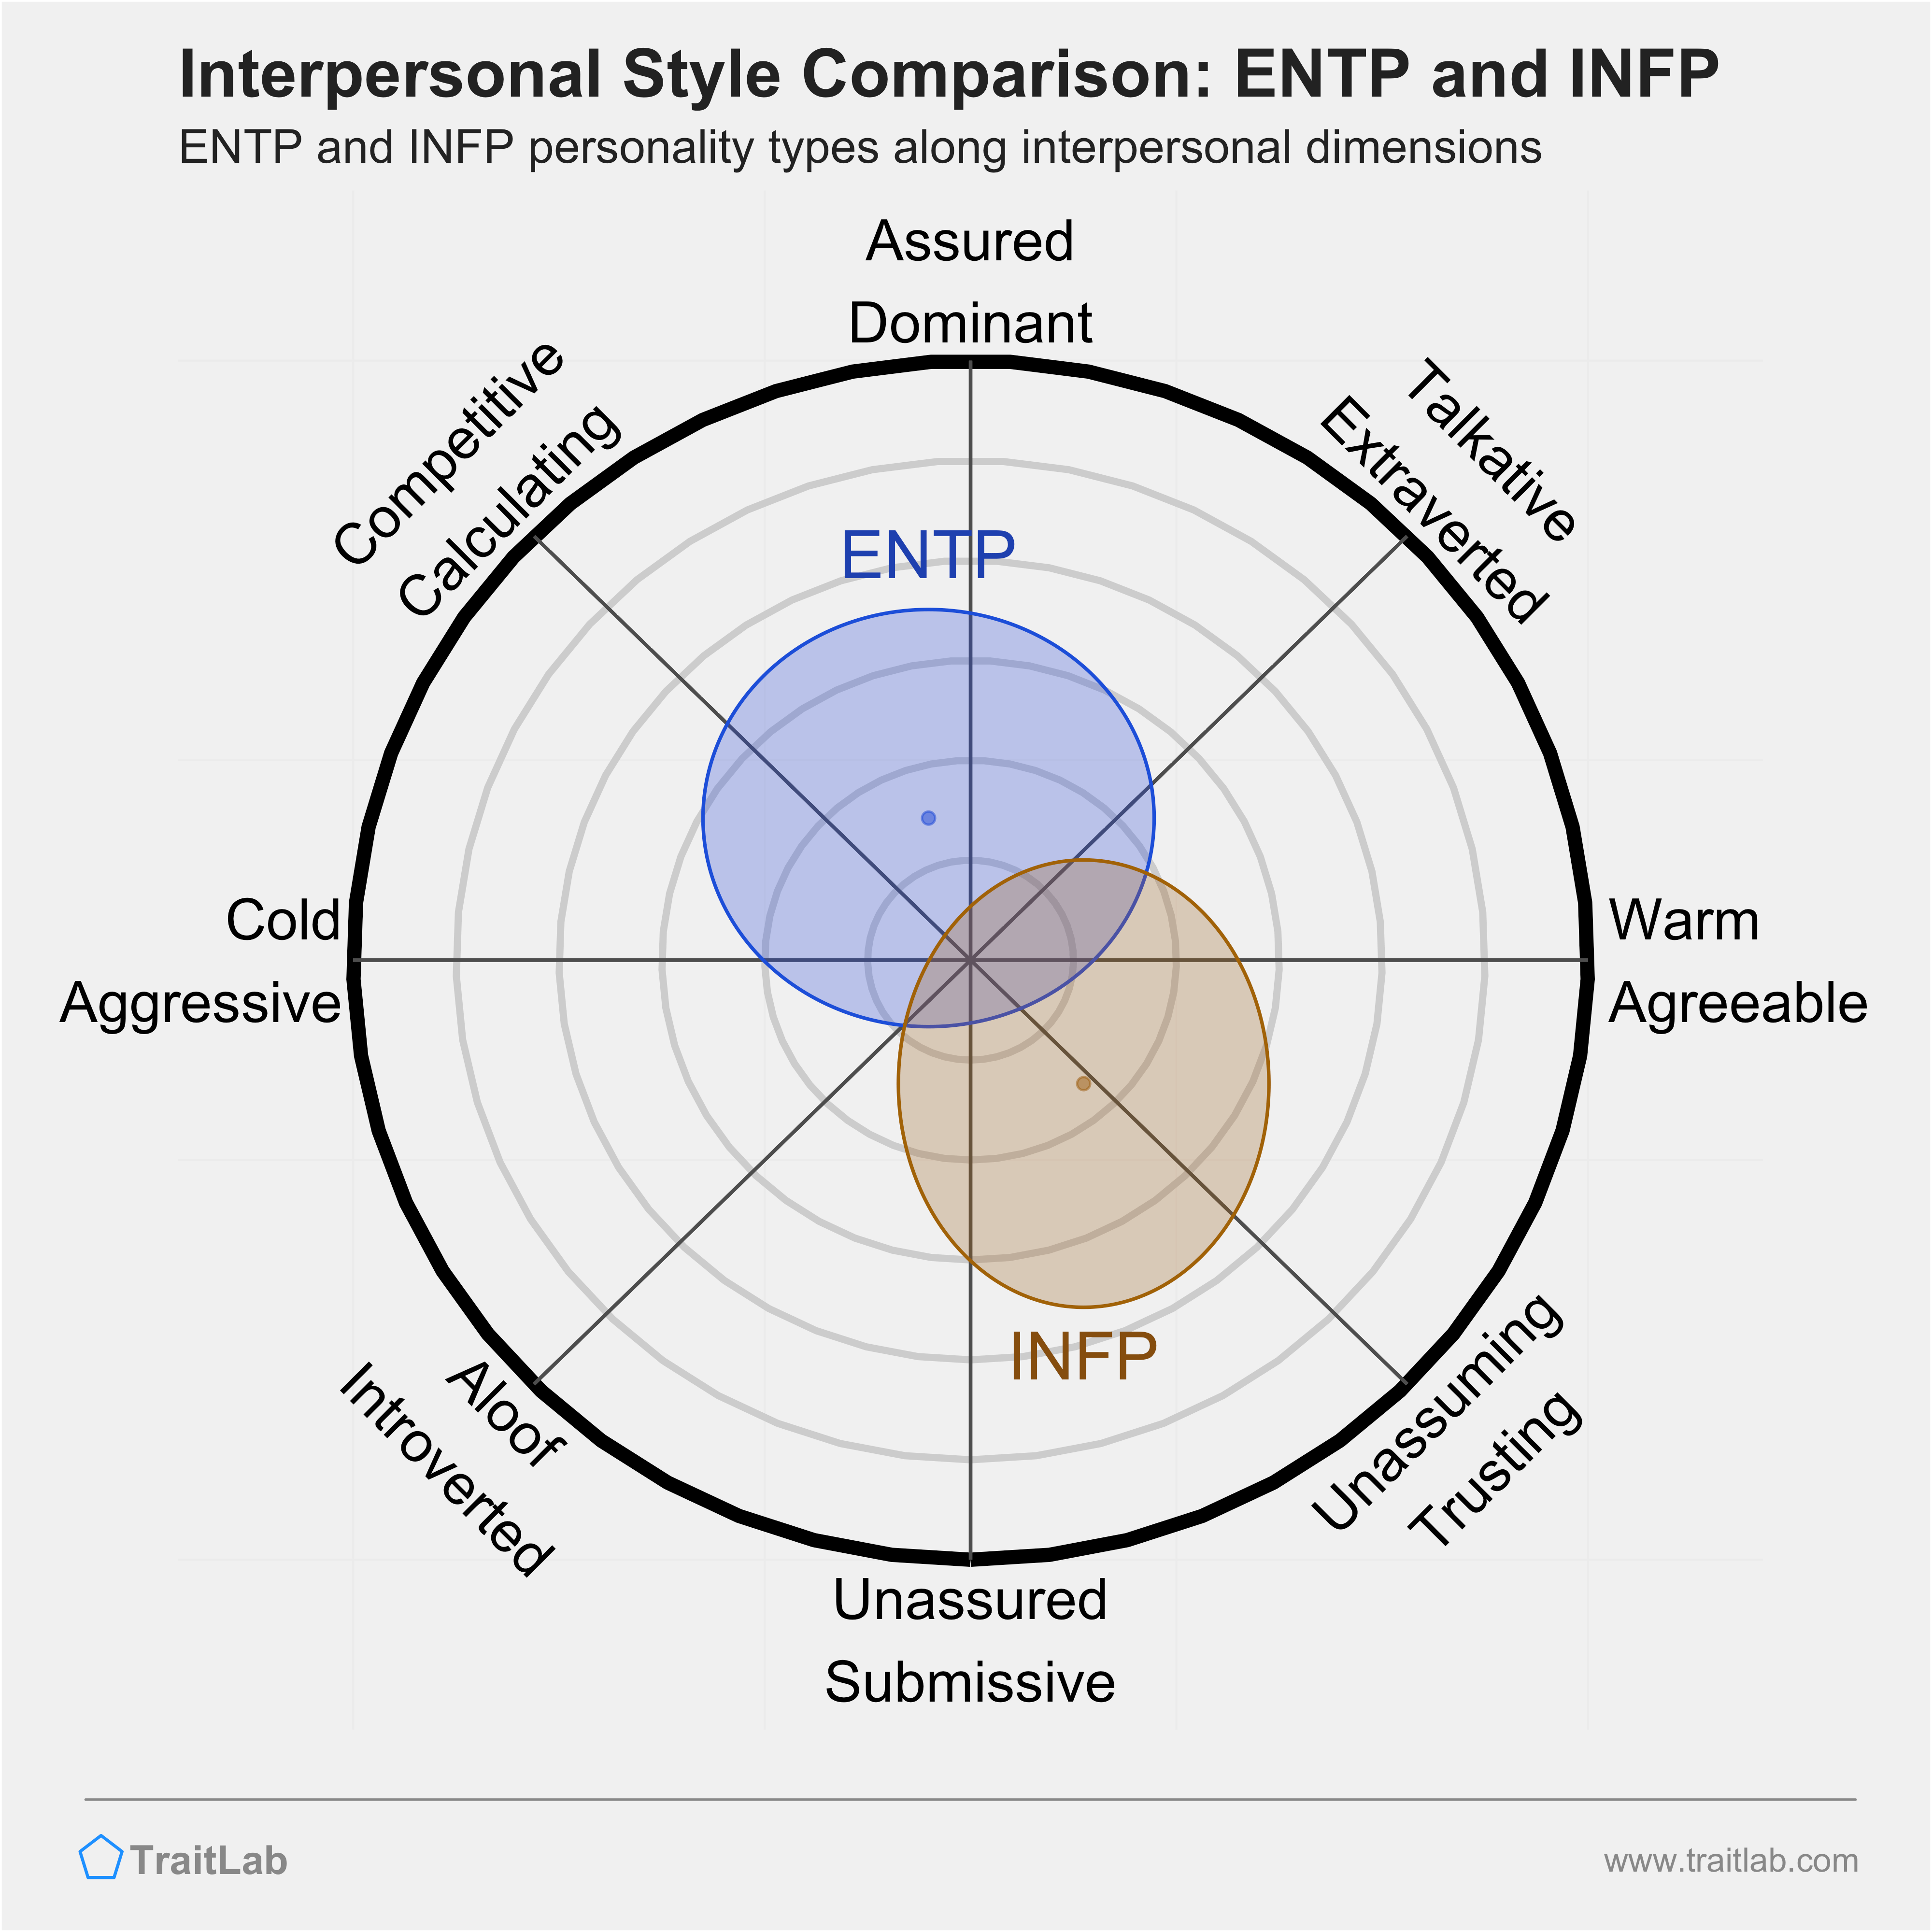 ENTP and INFP comparison across interpersonal dimensions